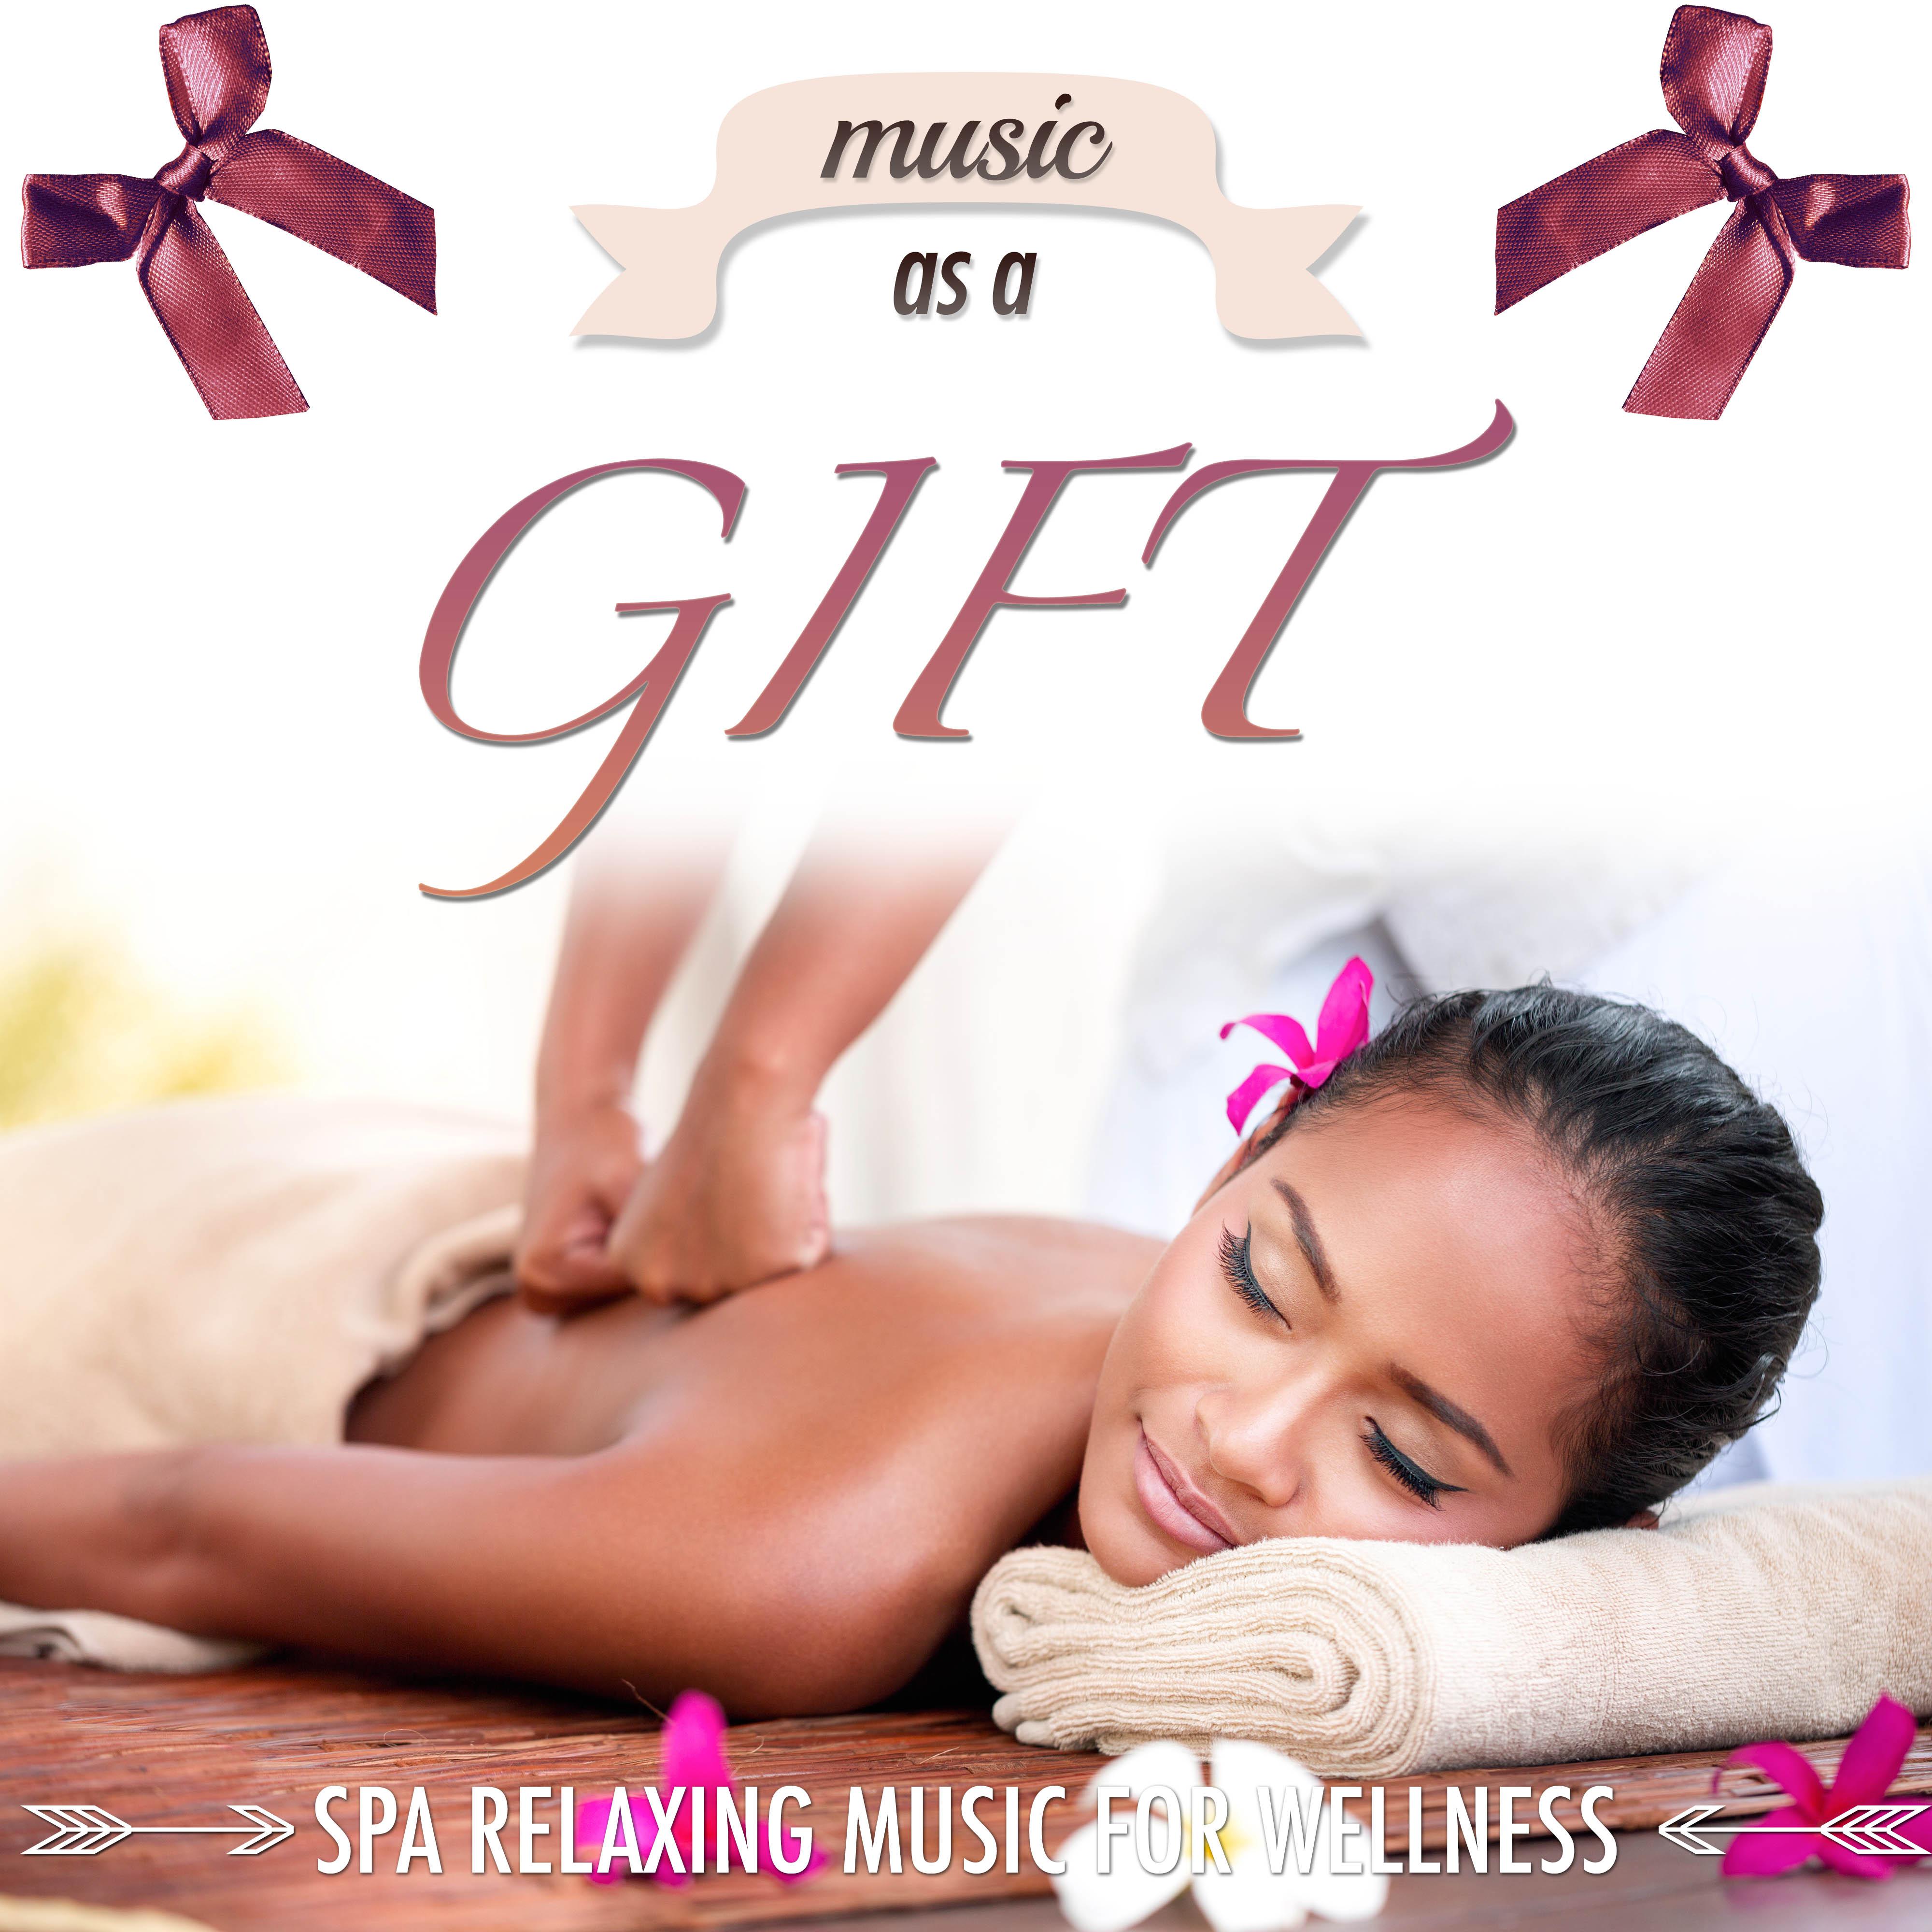 Music as a Gift: Sound Therapy Spa Relaxing Music to help you Soothe your Mind at Wellness Centers, with Natural White Noise Sounds for Body Harmony